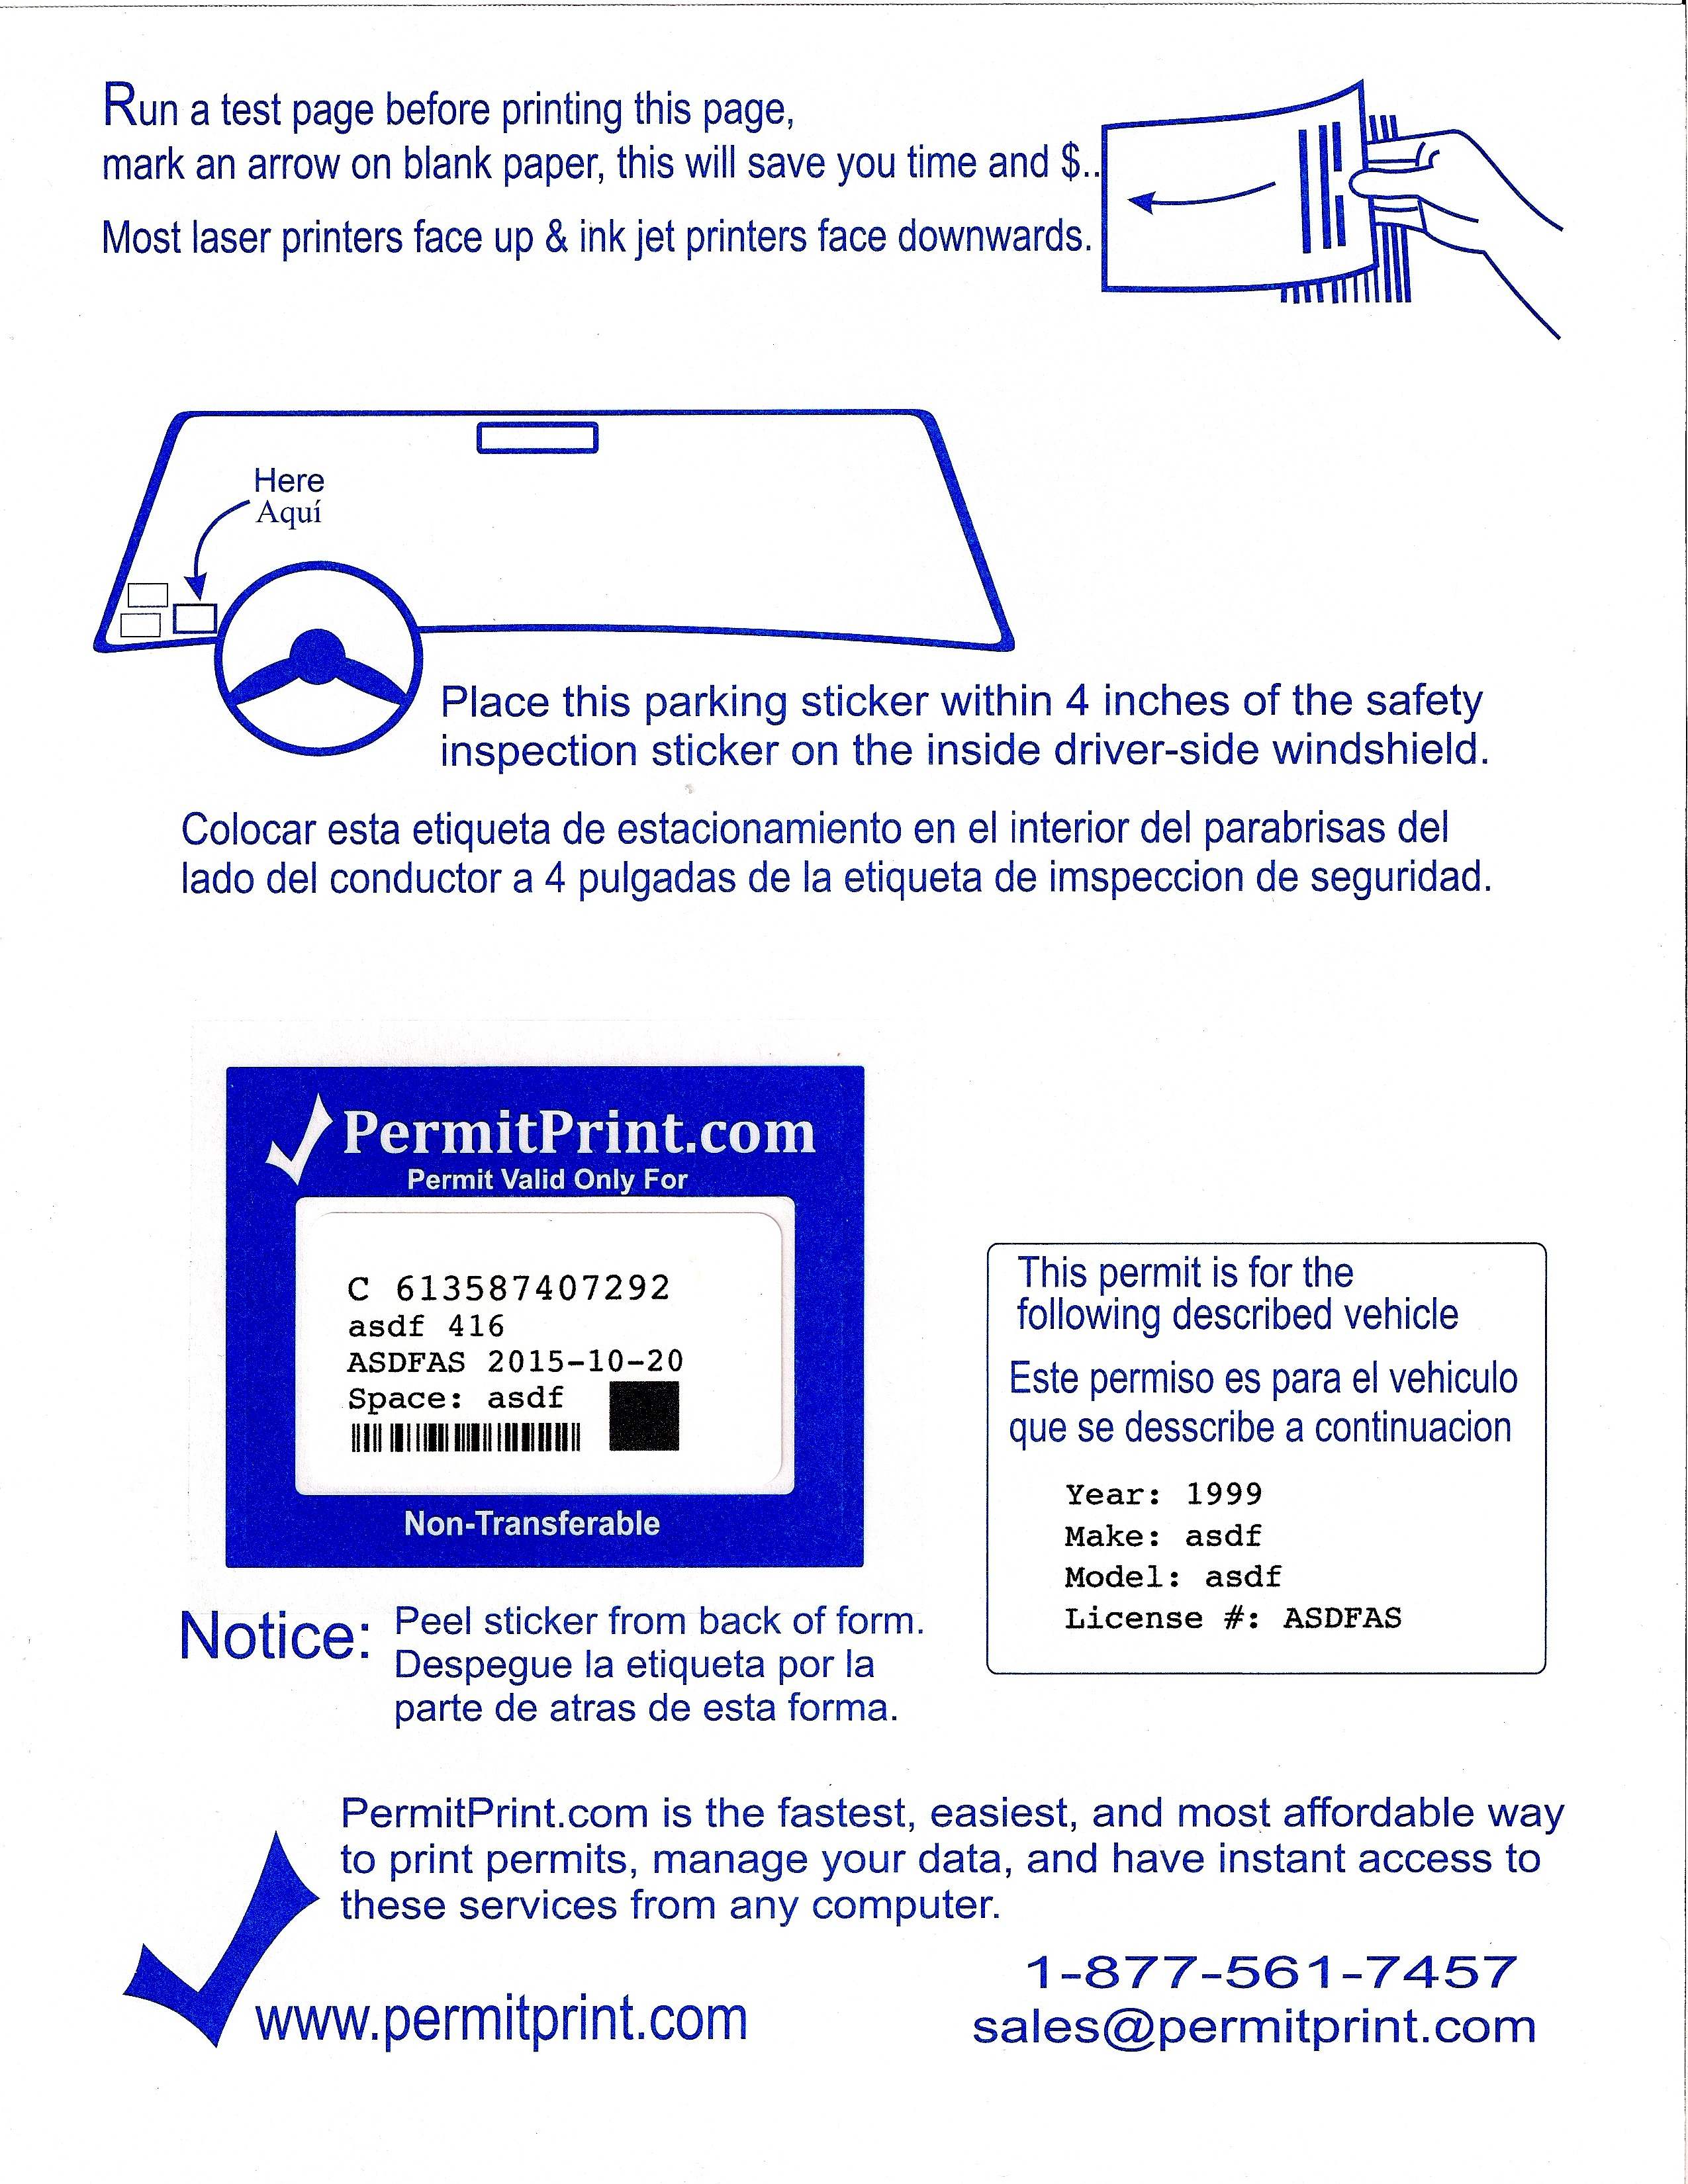 Permitprint | Parking Permits Made Easy - Free Printable Parking Permits